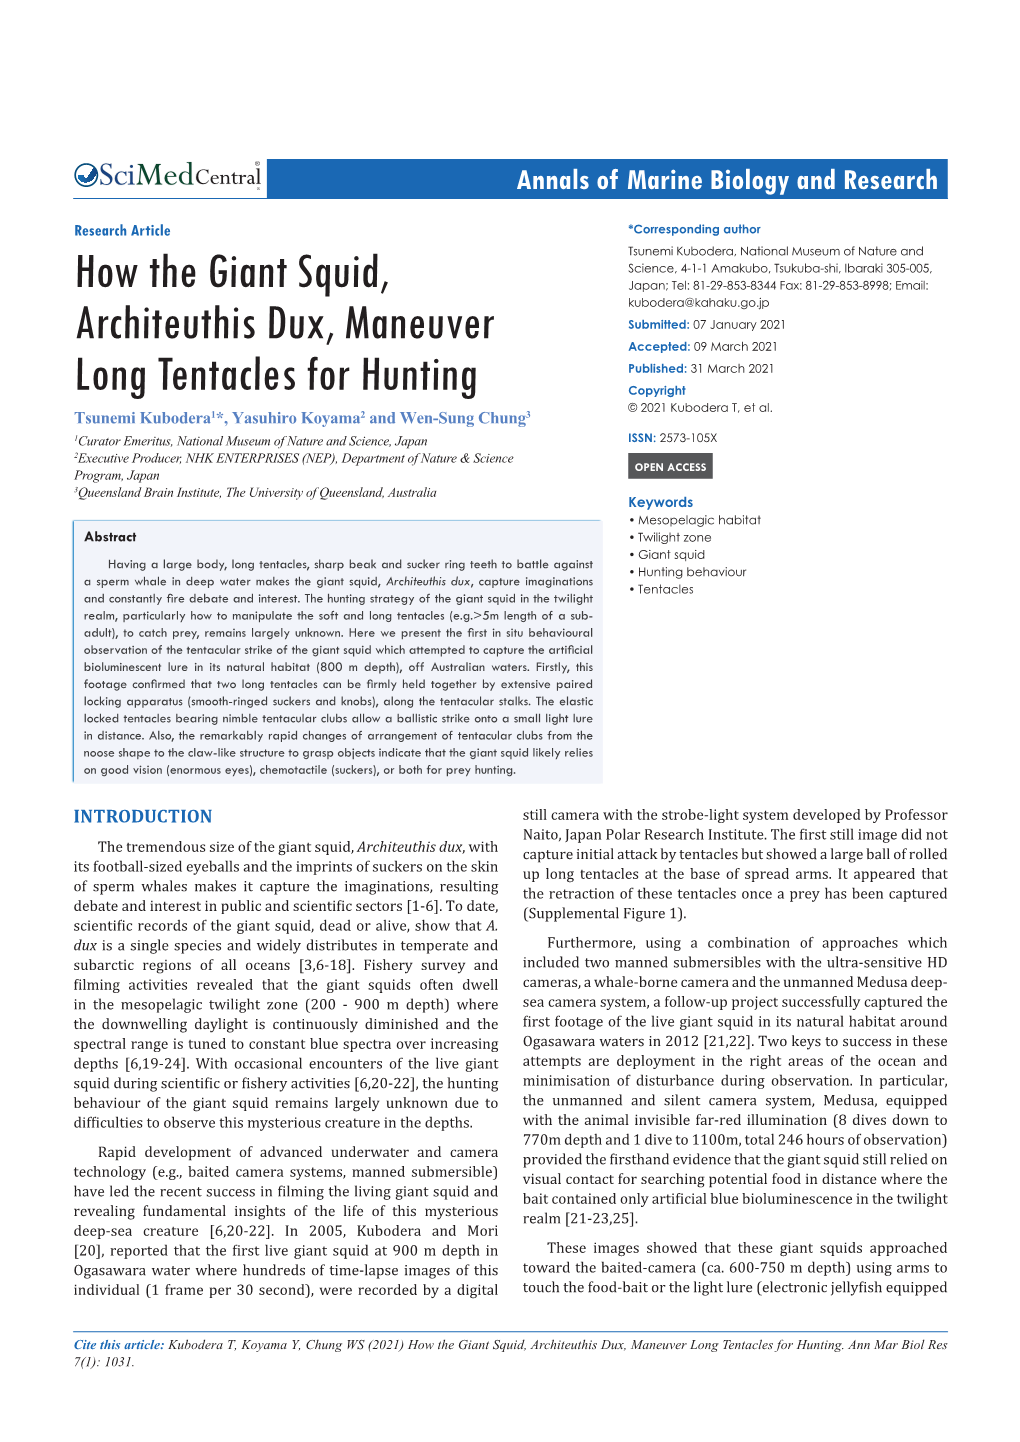 How the Giant Squid, Architeuthis Dux, Maneuver Long Tentacles for Hunting